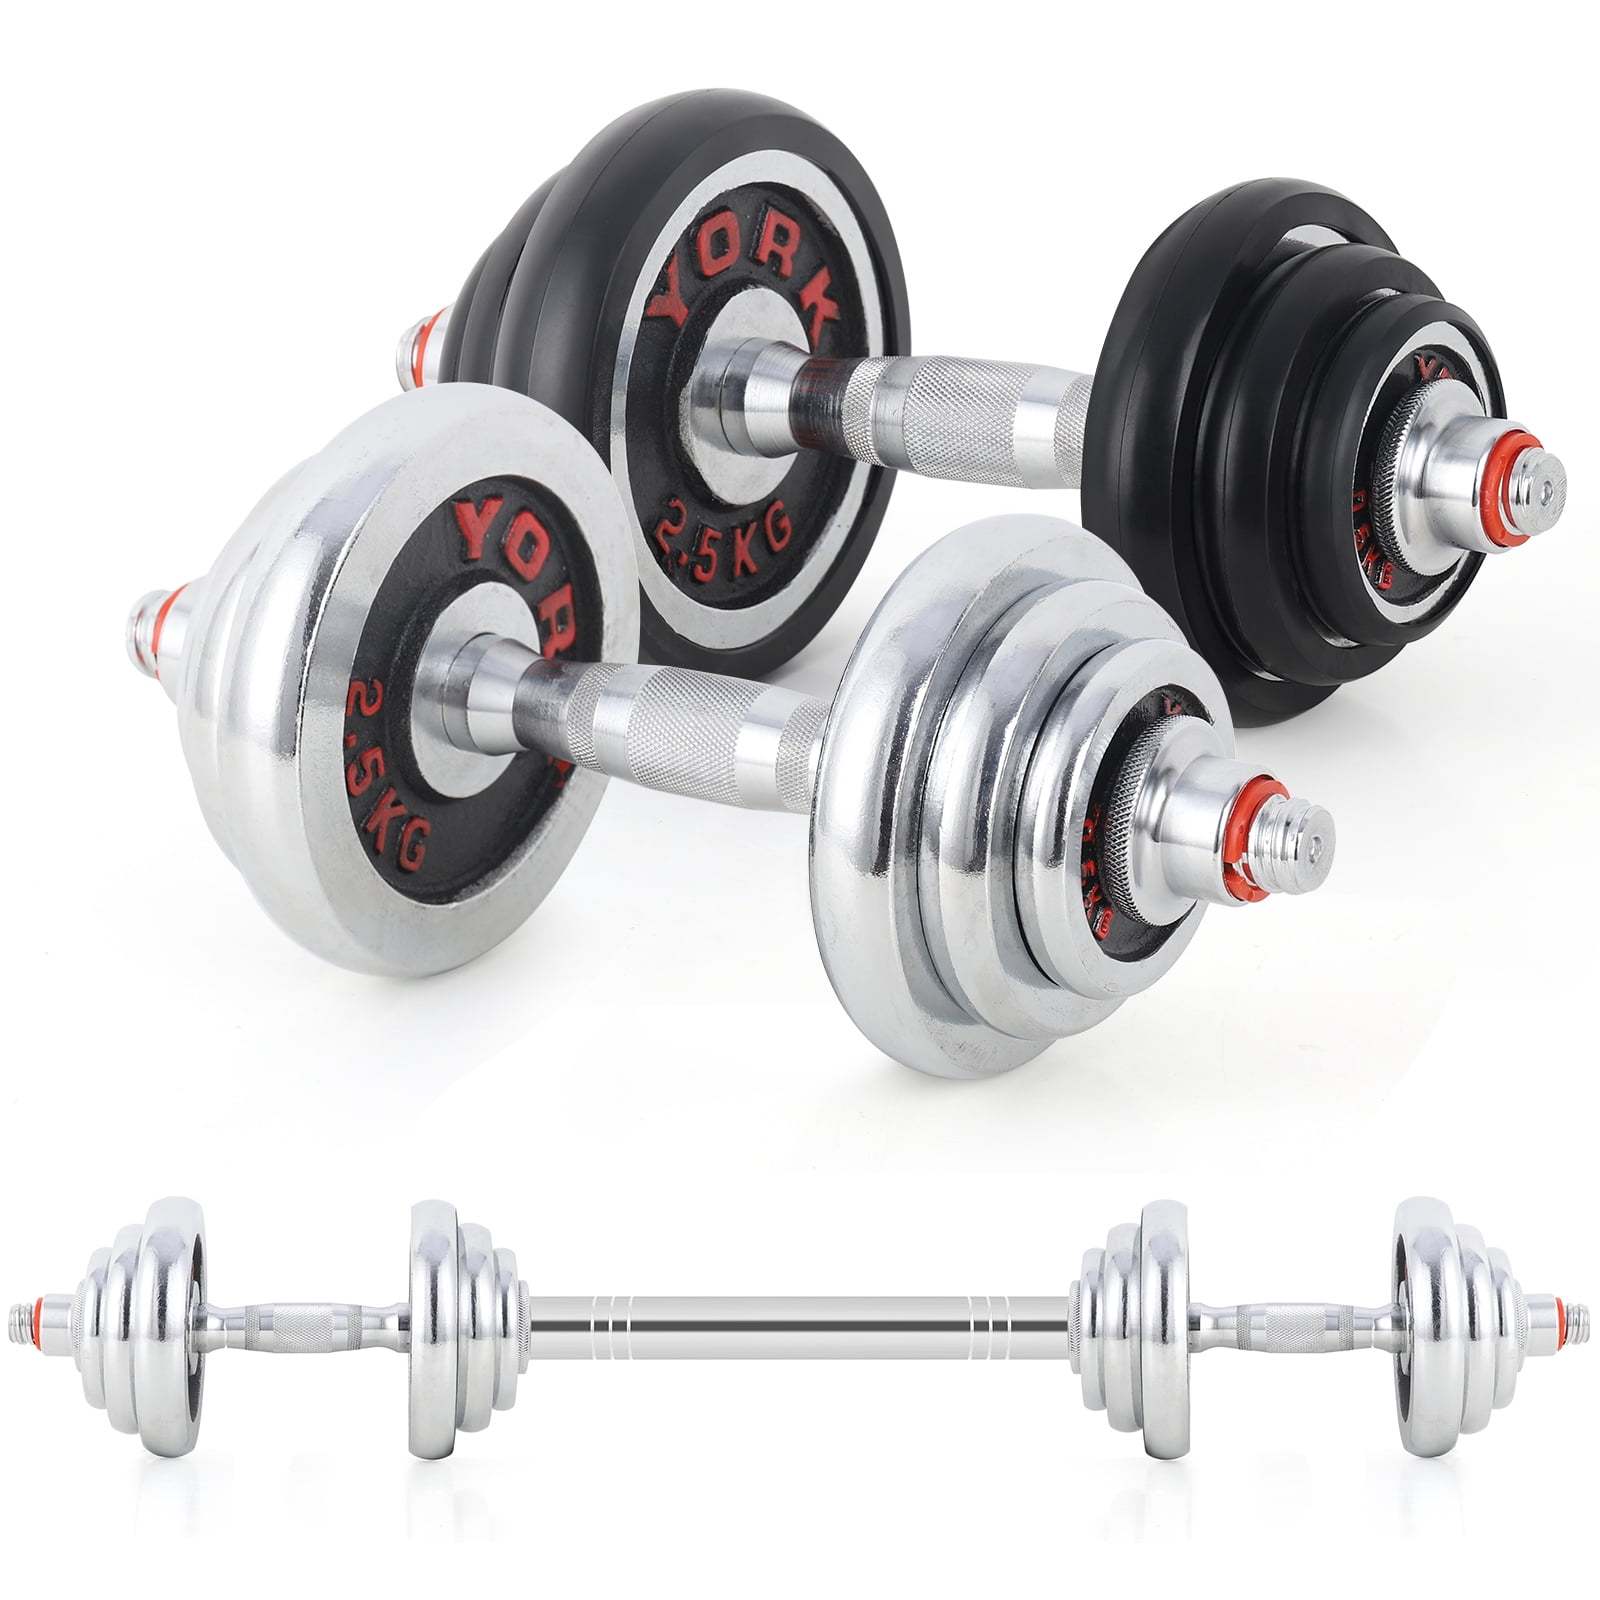 Fiudx Free Weights Adjustable Dumbbells for Men Women,66LBS Dumbbells Set Dumbbells Barbell with Connecting Rod Workout Equipment Exercise Training 